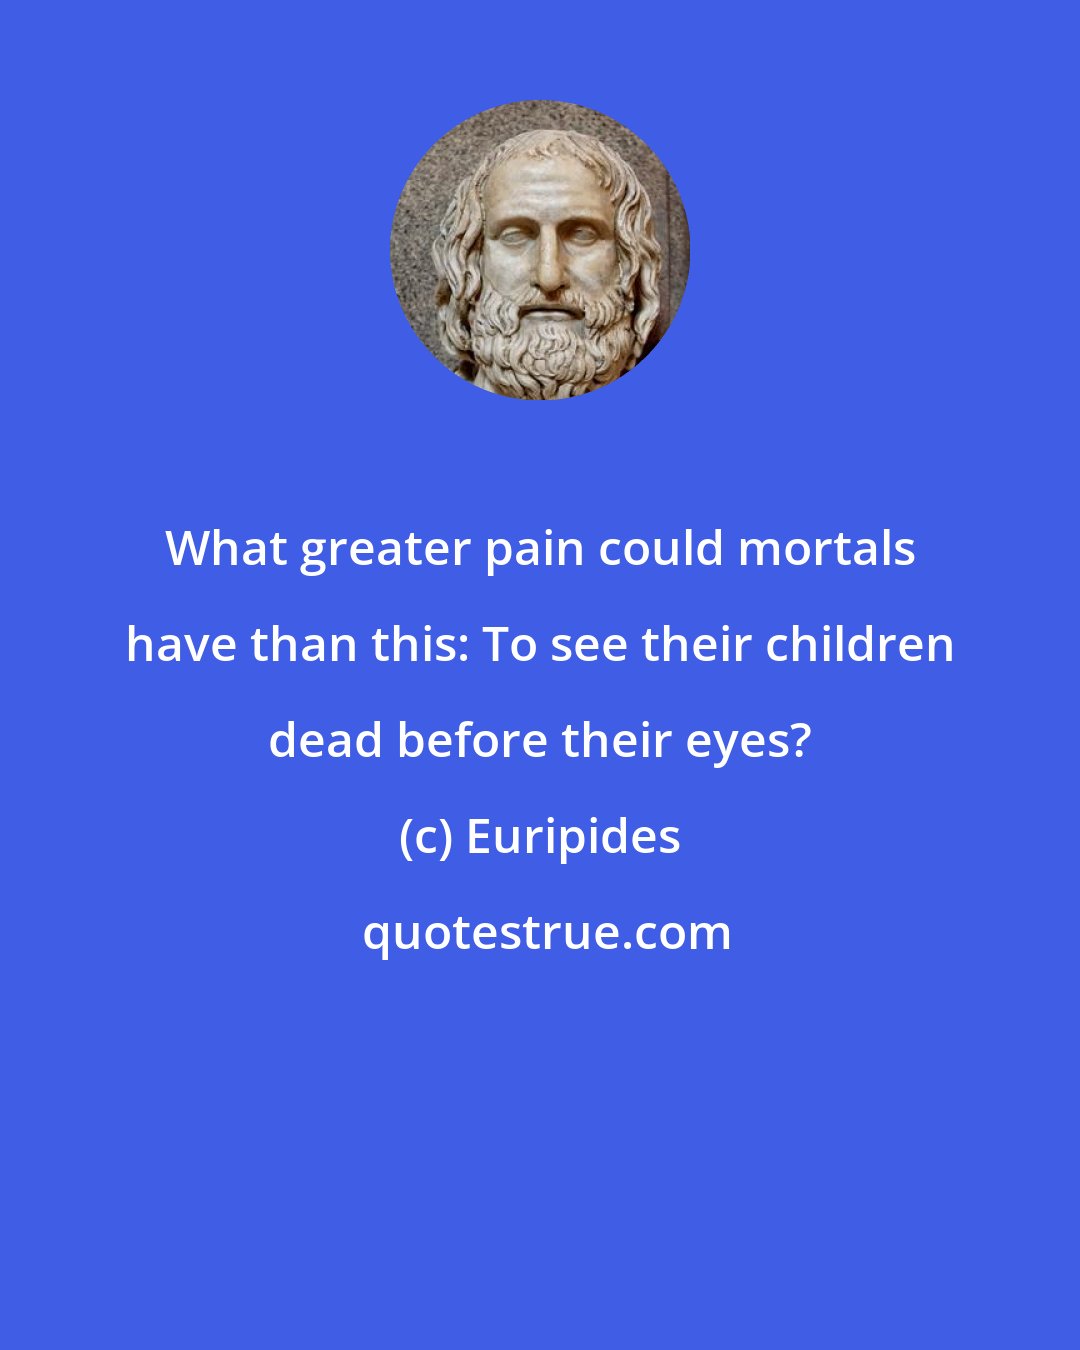 Euripides: What greater pain could mortals have than this: To see their children dead before their eyes?